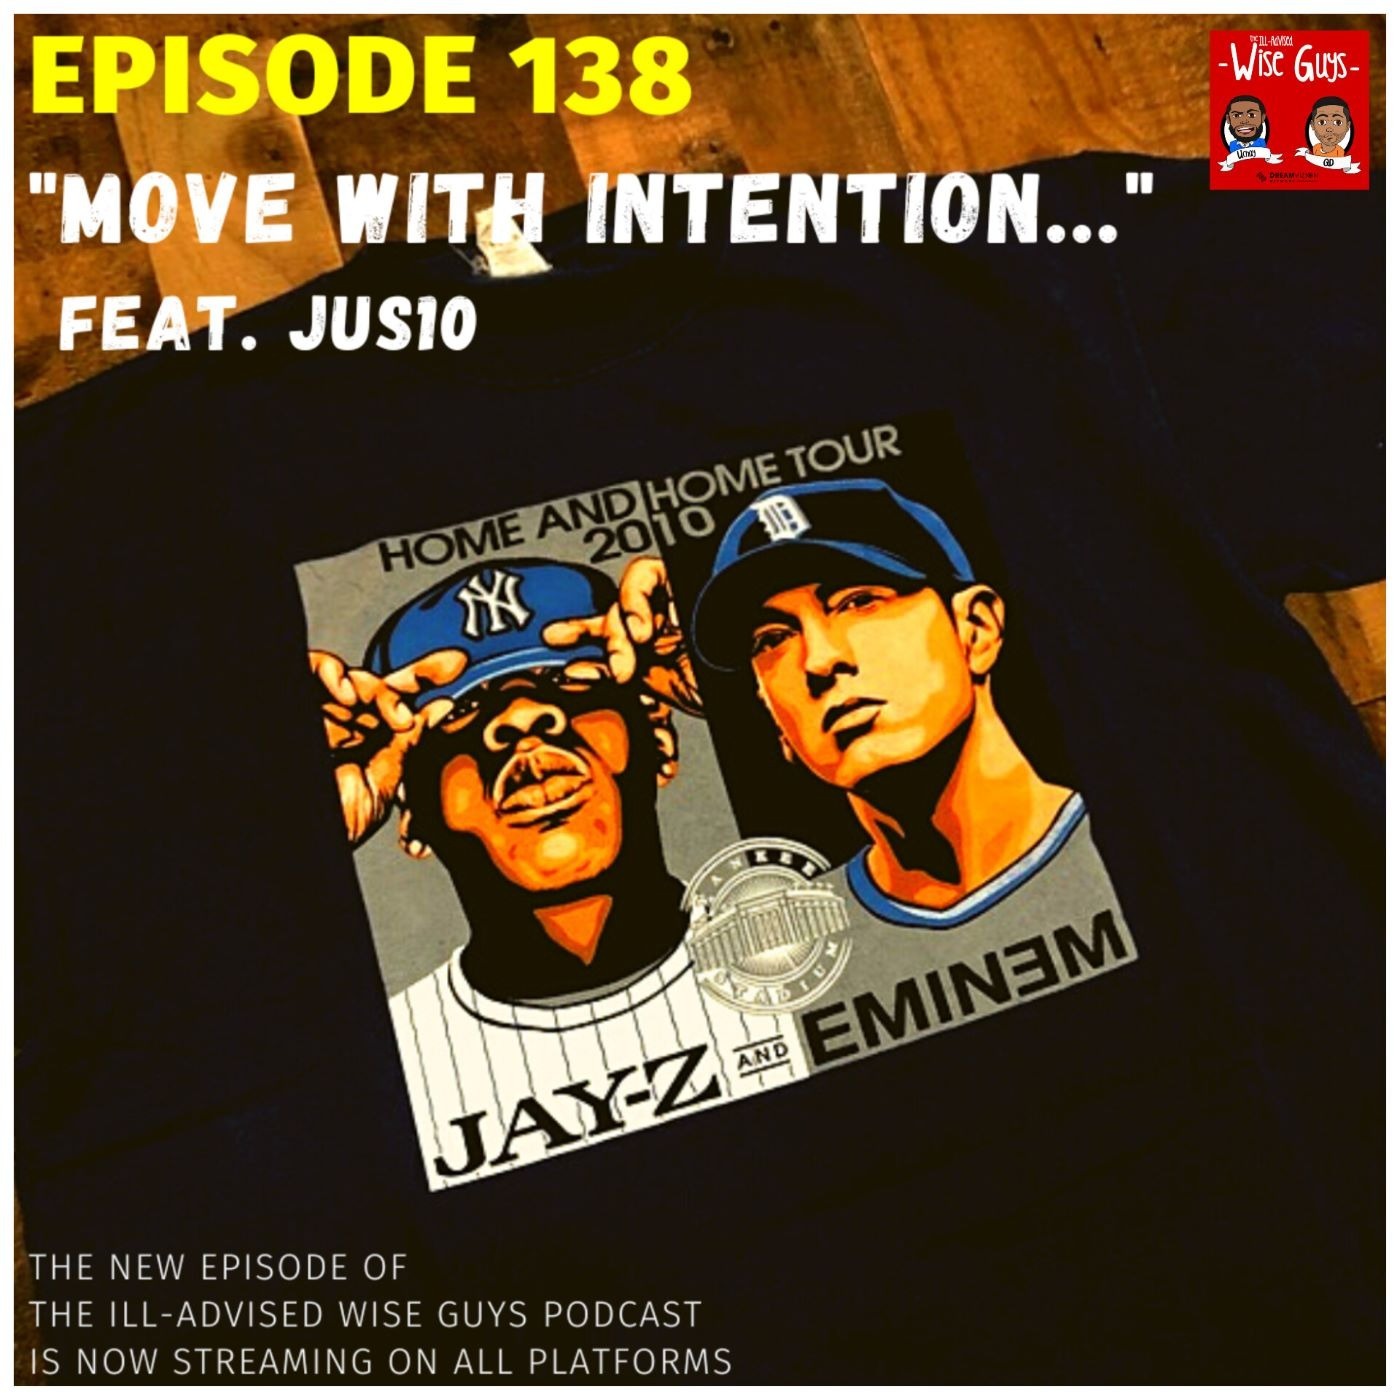 Episode 138 - "Move With Intention..." (Feat. Jus10)